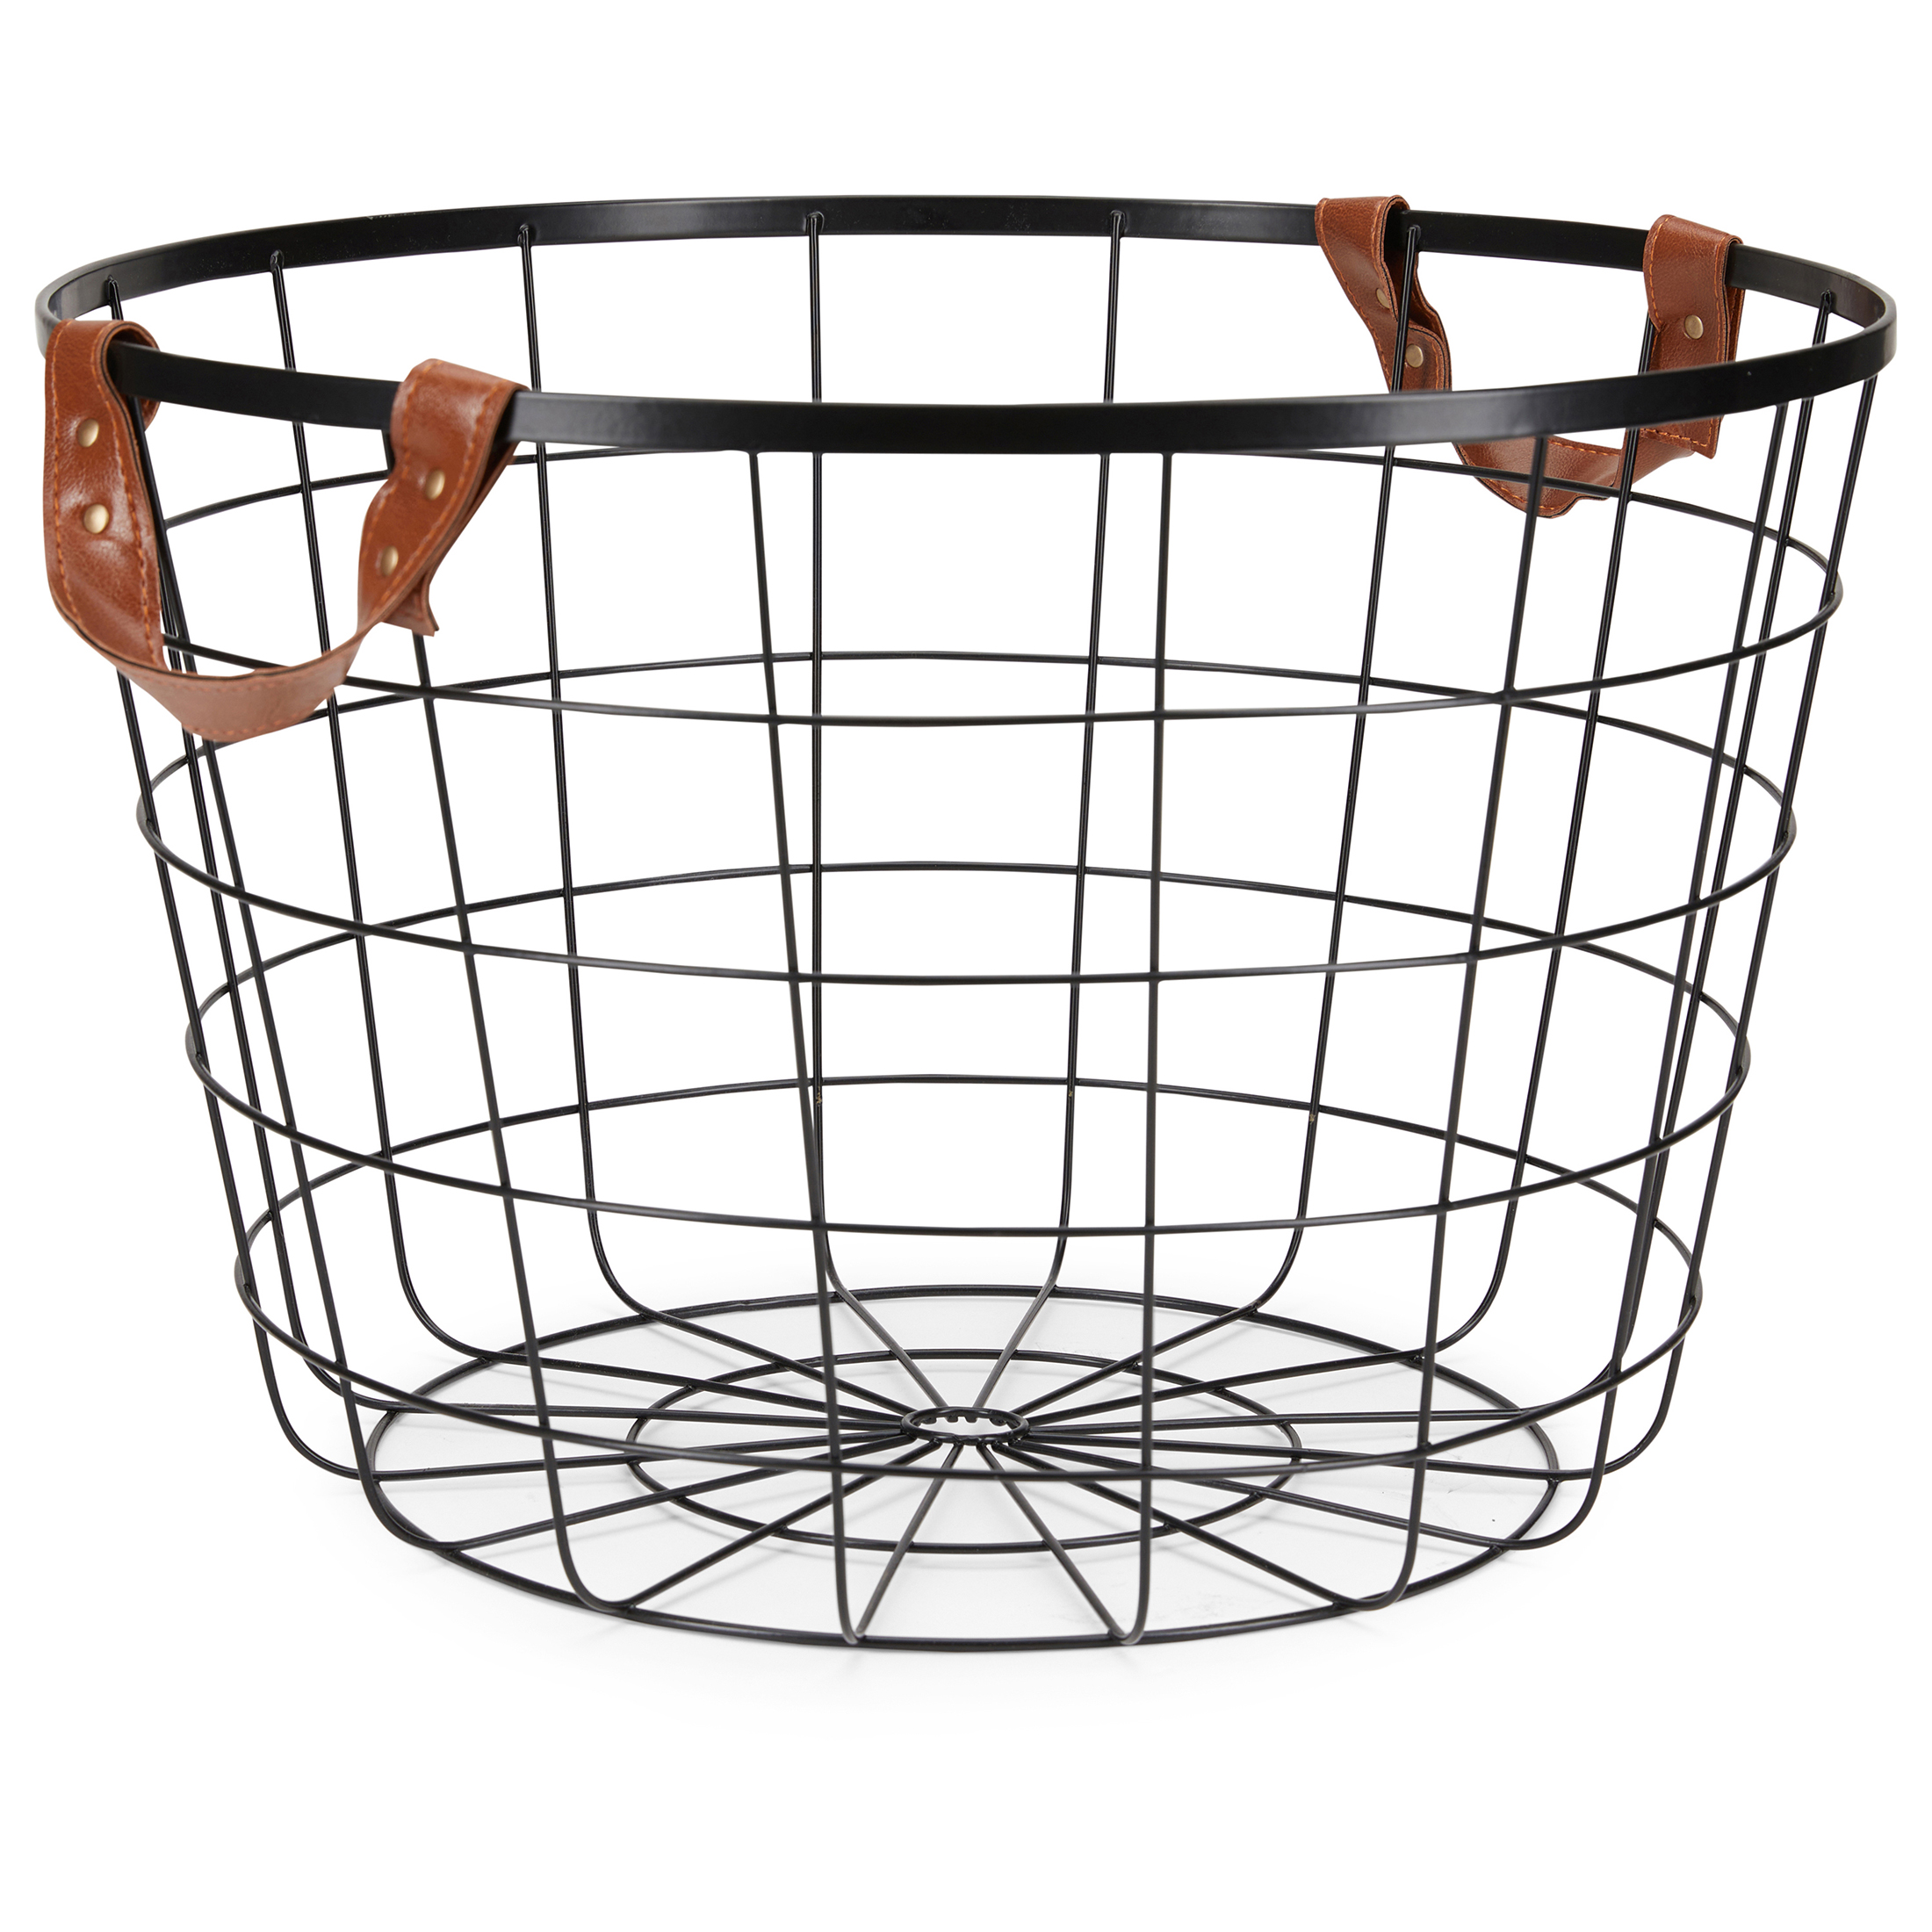 Mainstays Large Round Wire Basket with Handles, Black - image 1 of 6